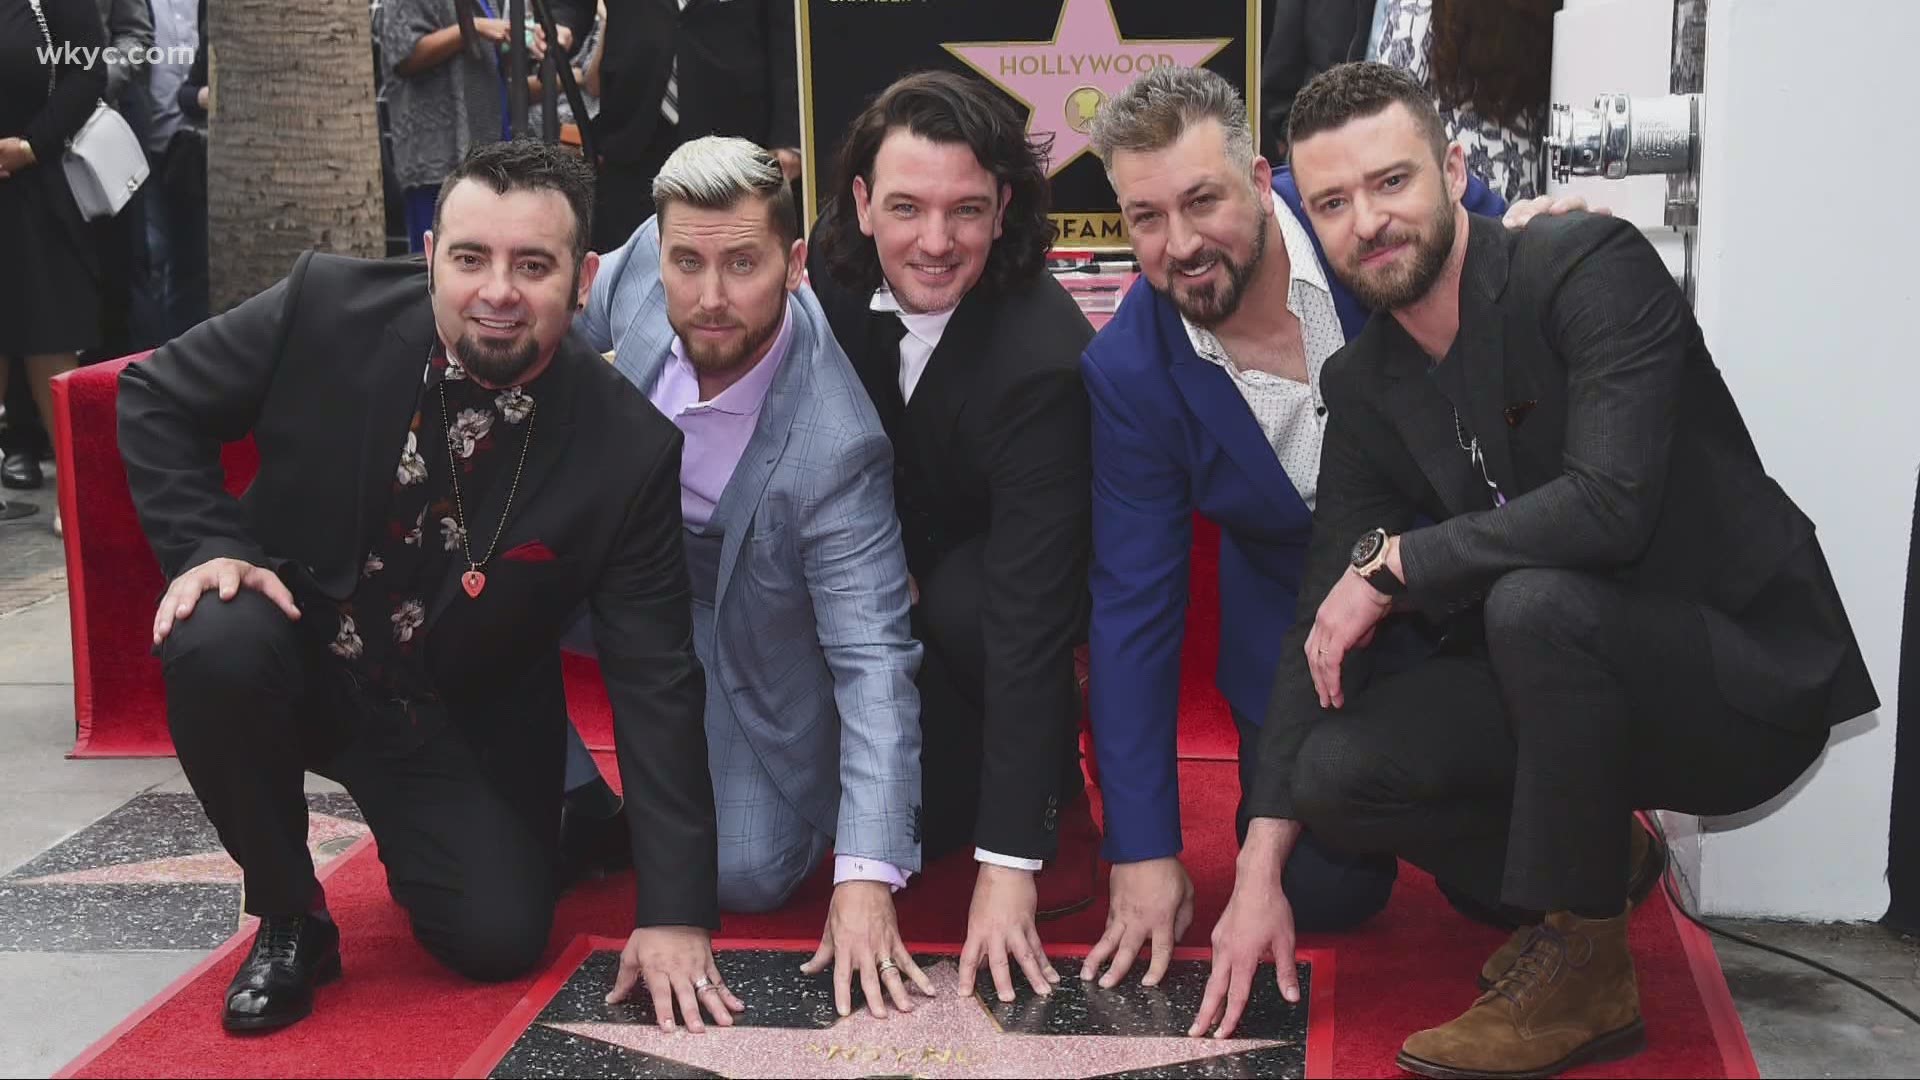 Members of Boy bands, NSYNC and the backstreet boys made some of their fans very happy over the weekend.